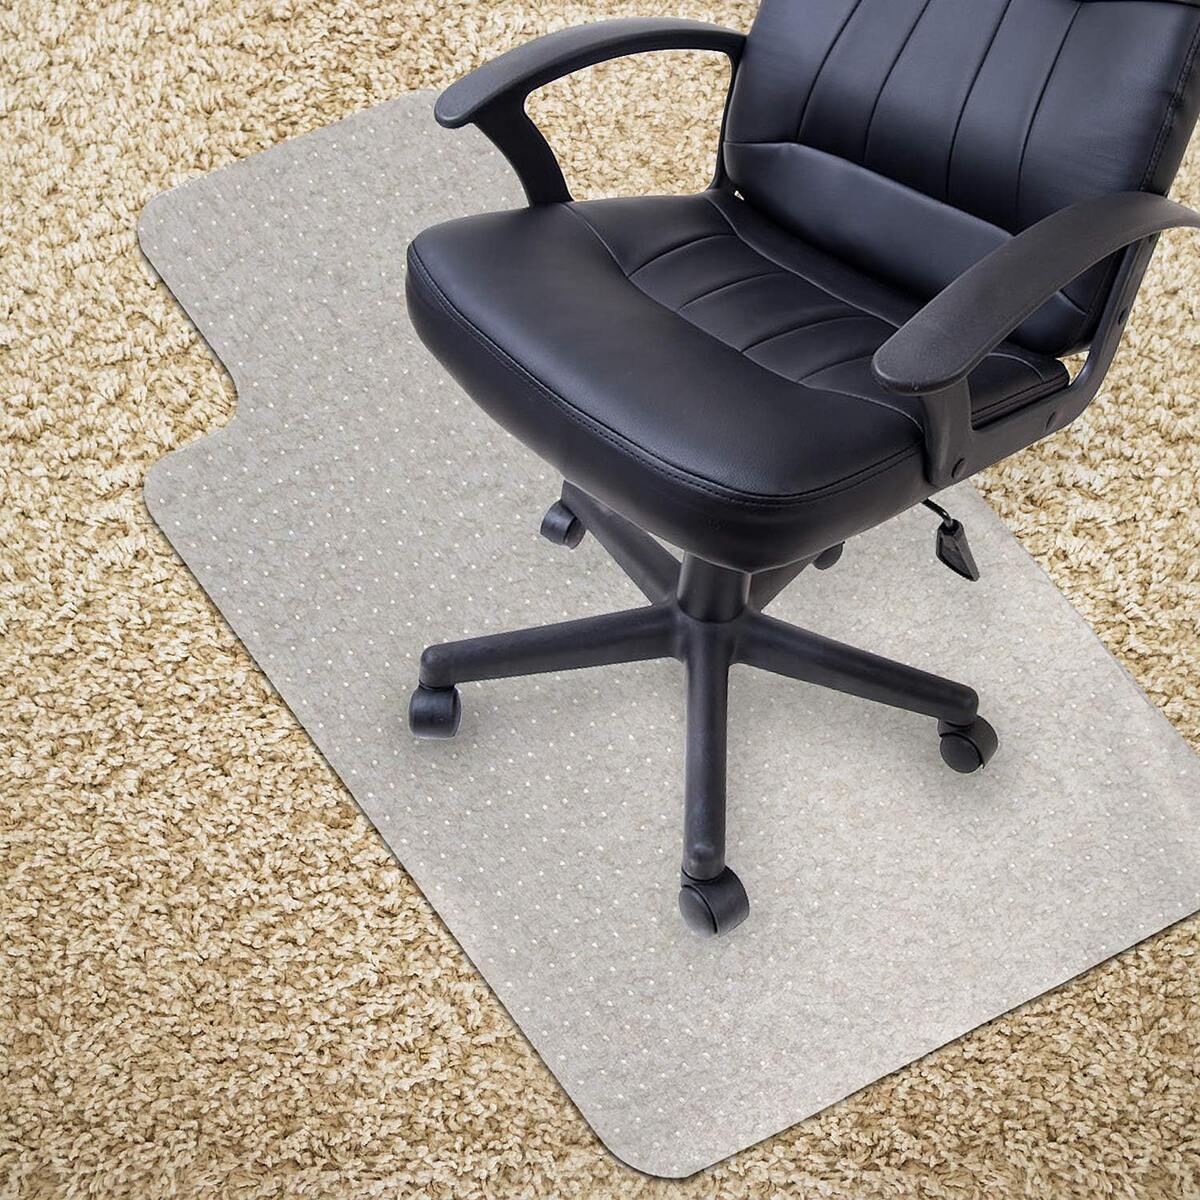 How To Use An Office Chair On Carpet